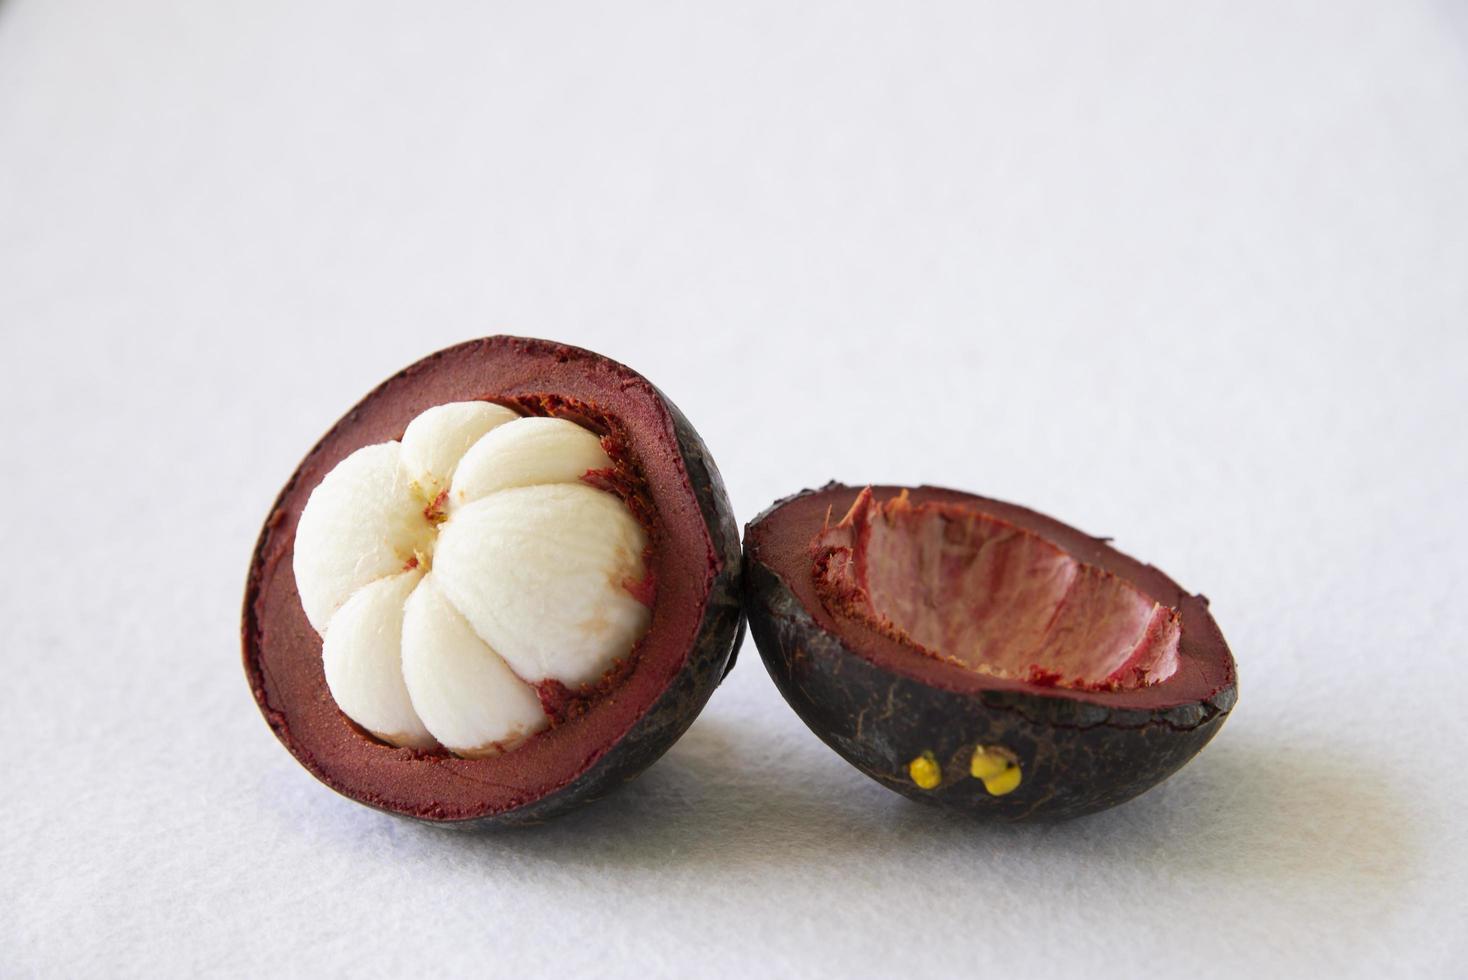 Mangosteen Thai popular fruits - a tropical fruit with sweet juicy white segments of flesh inside a thick reddish-brown rind. photo